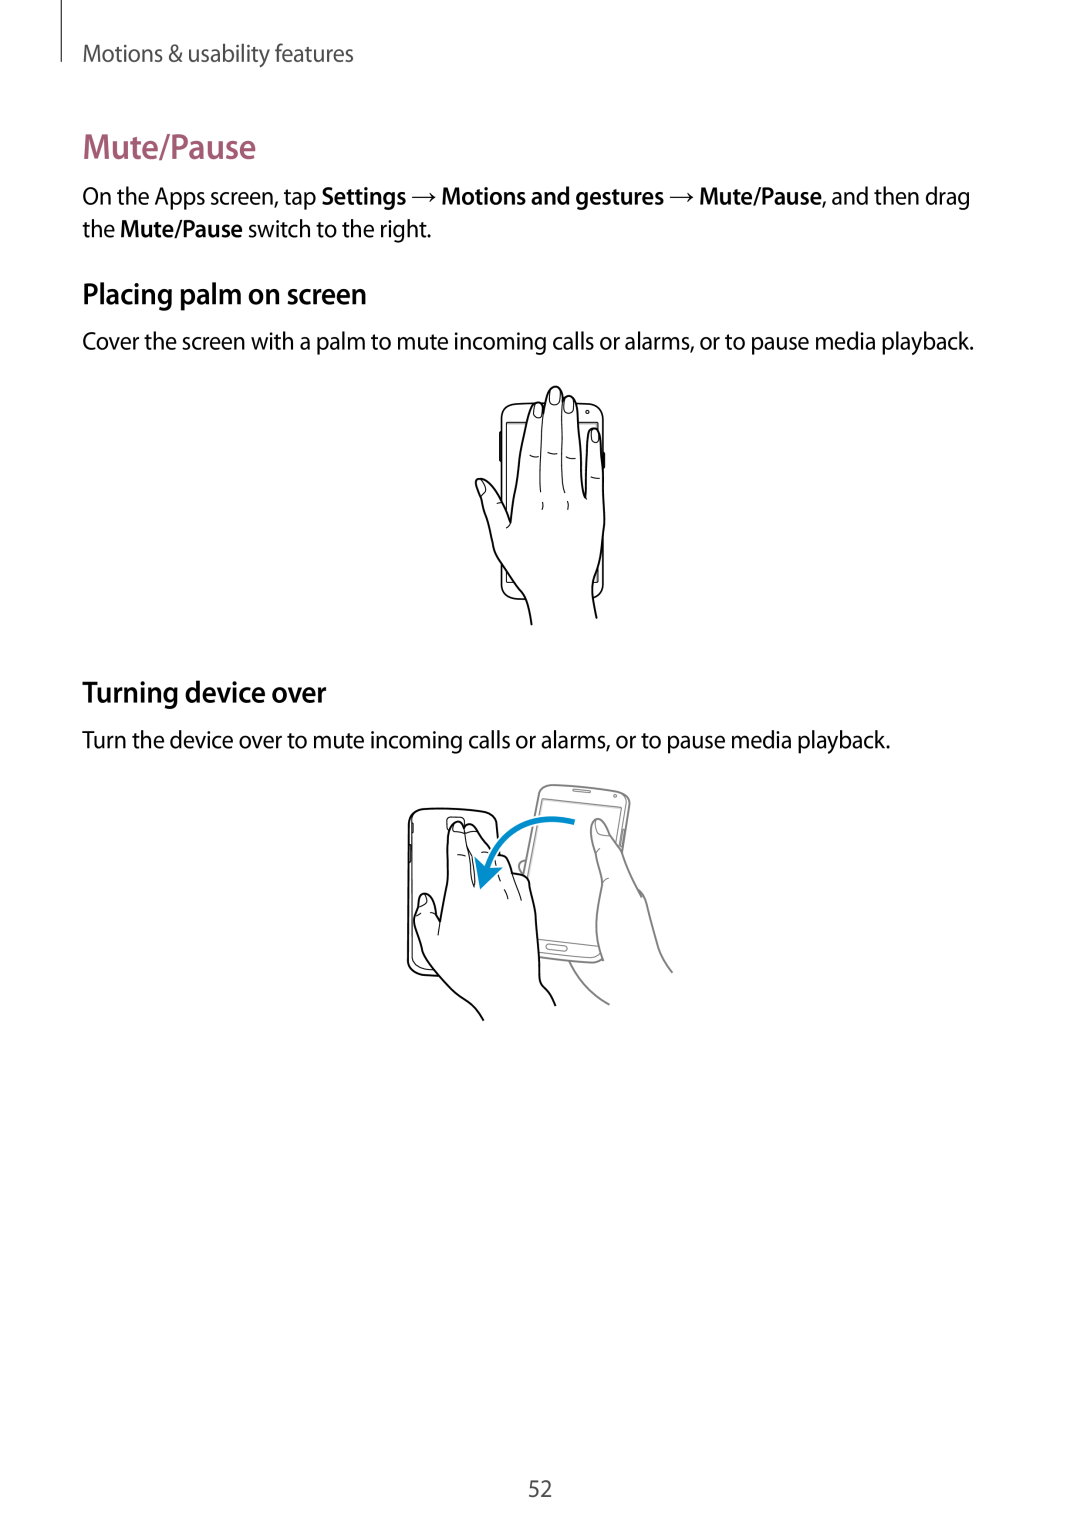 Samsung SM-G901FZWAATL manual Mute/Pause, Placing palm on screen, Turning device over, Motions & usability features 